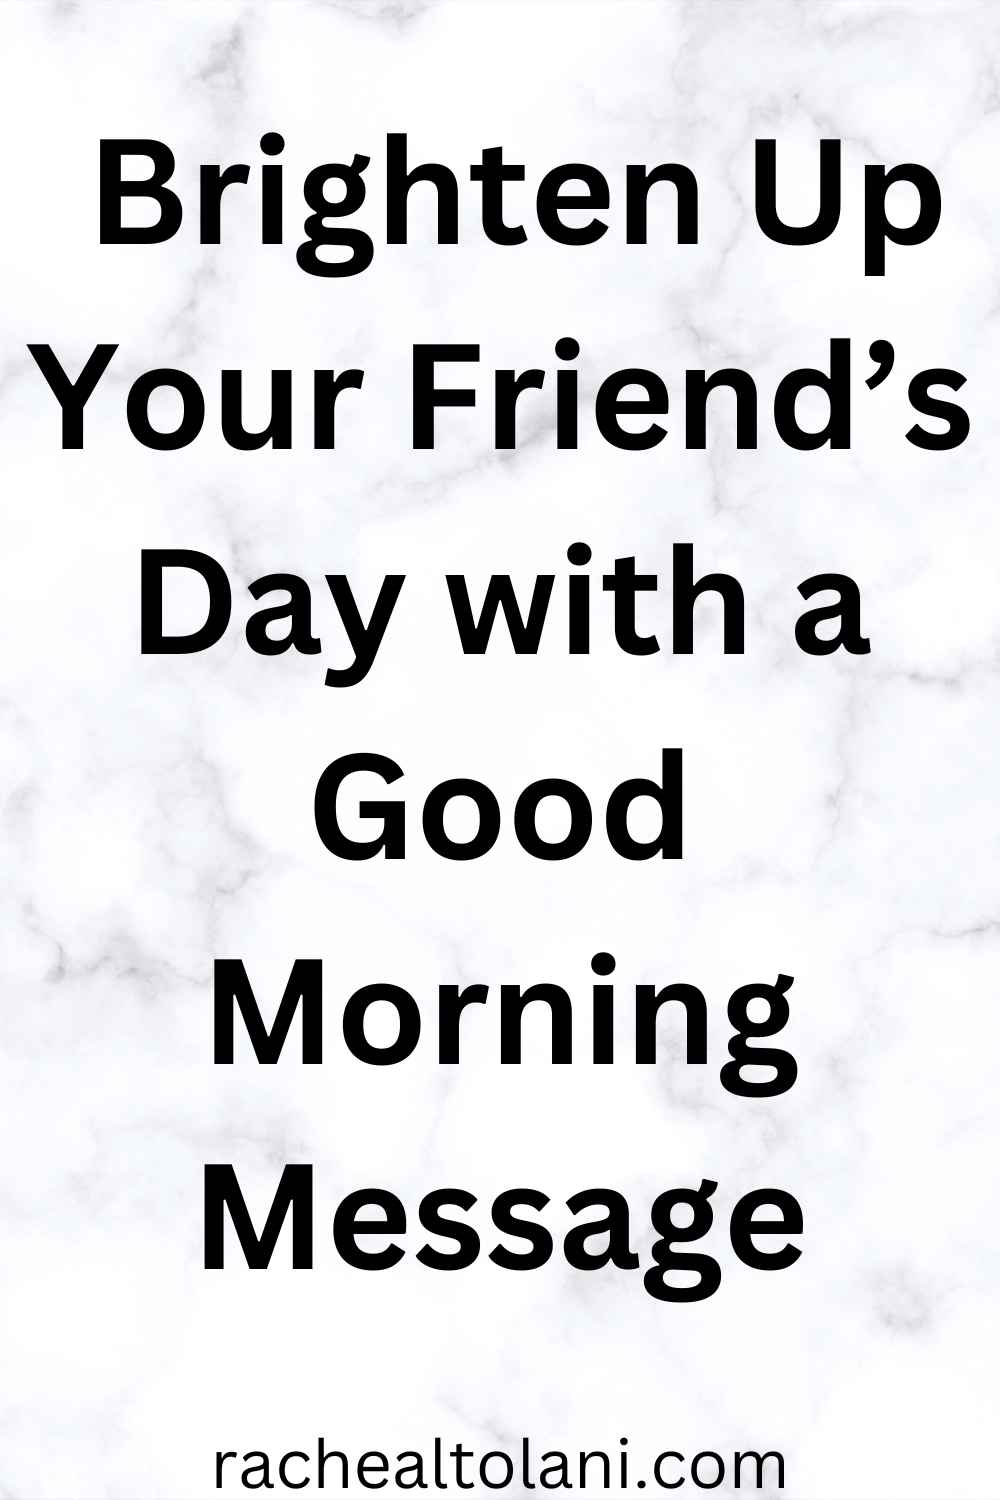 Good morning messages for friends